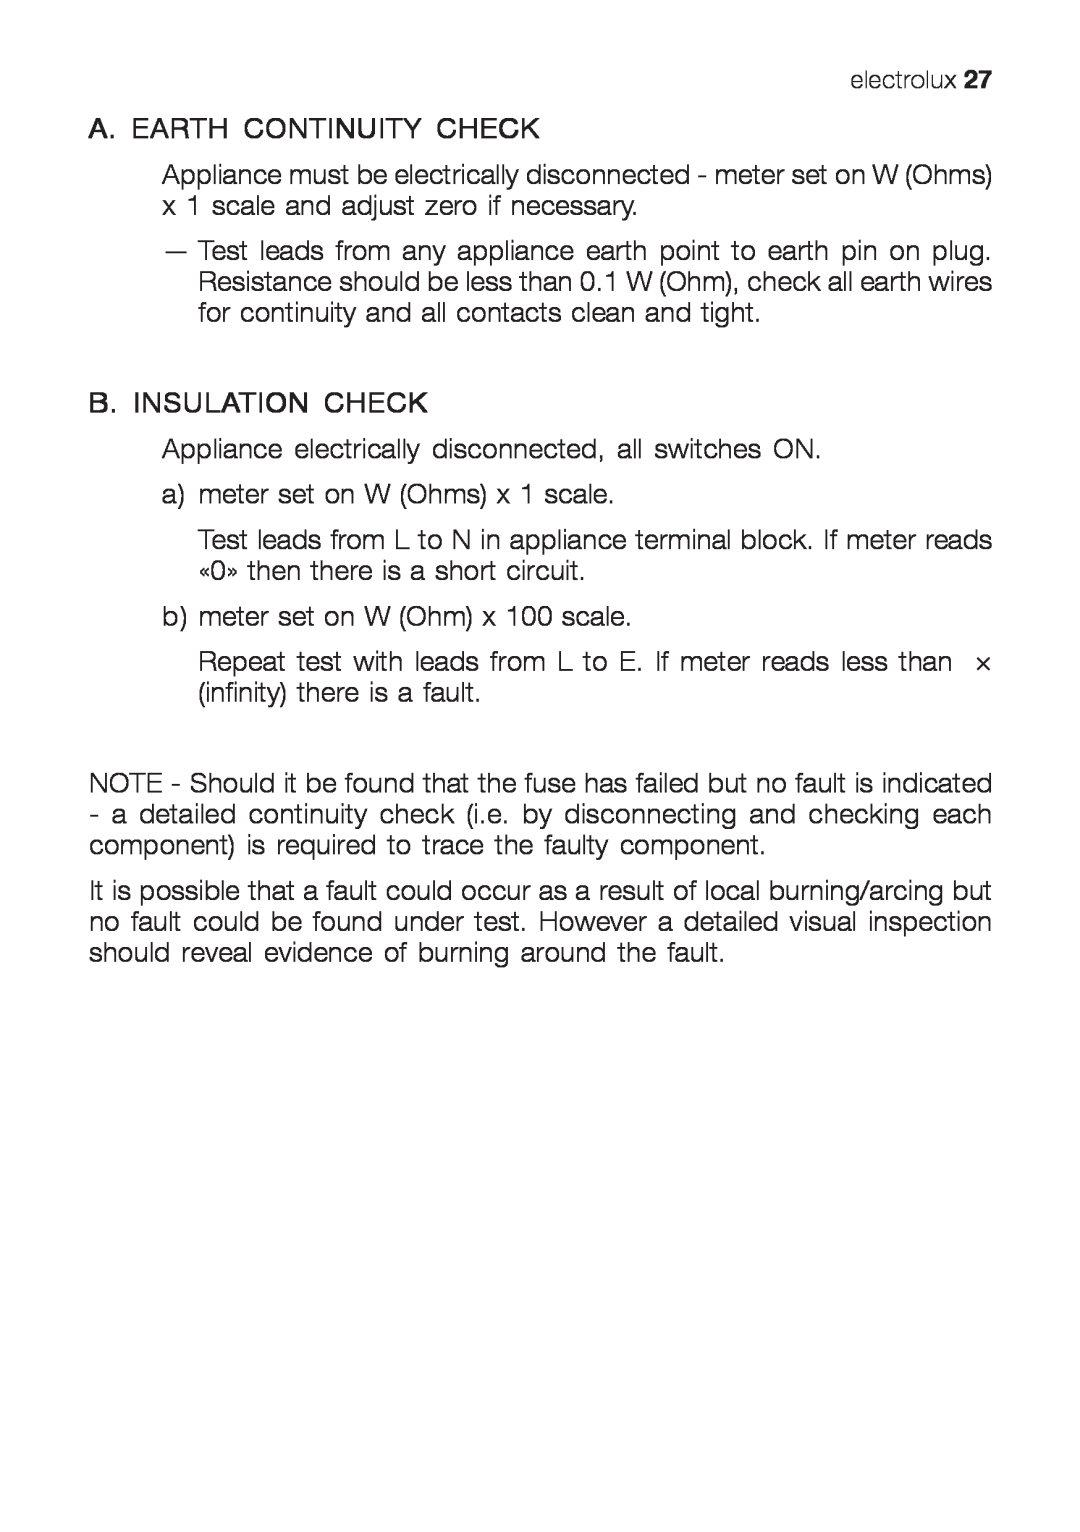 Electrolux EHG 6402, EHG 6412, EHG 6832 manual A. Earth Continuity Check, B. Insulation Check 